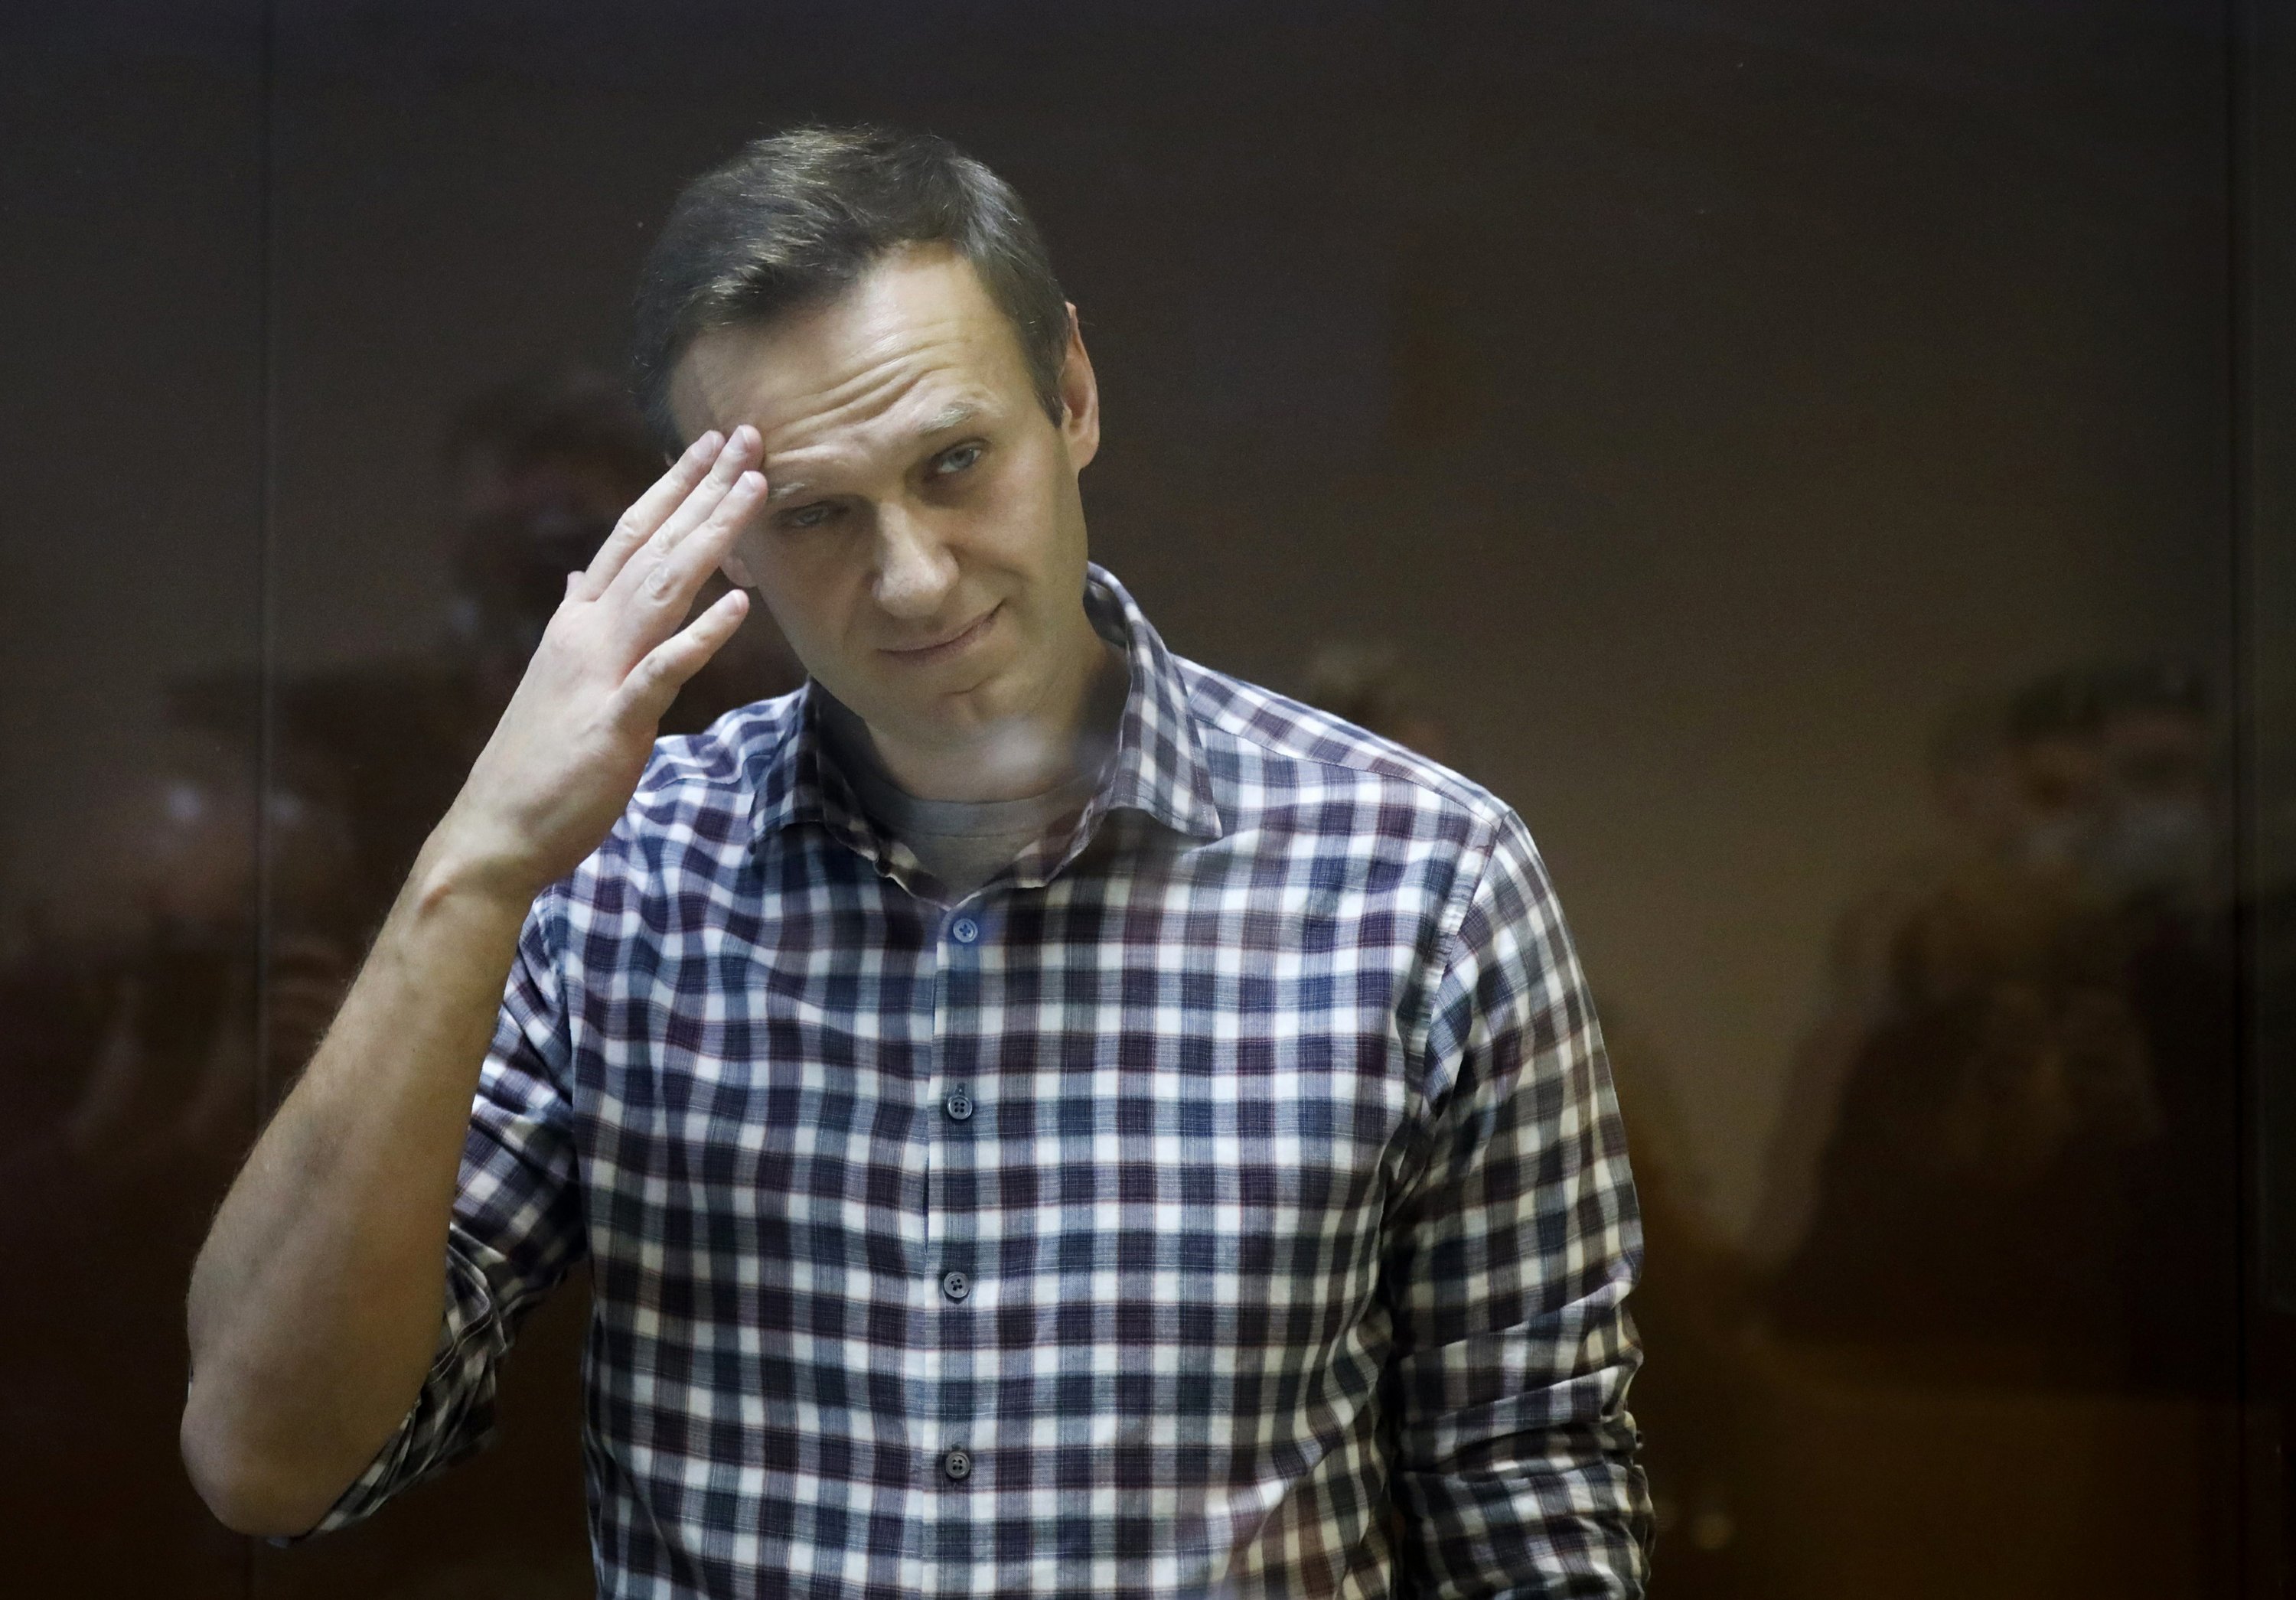 The health of Russia’s opposition leader Navalny is deteriorating in prison